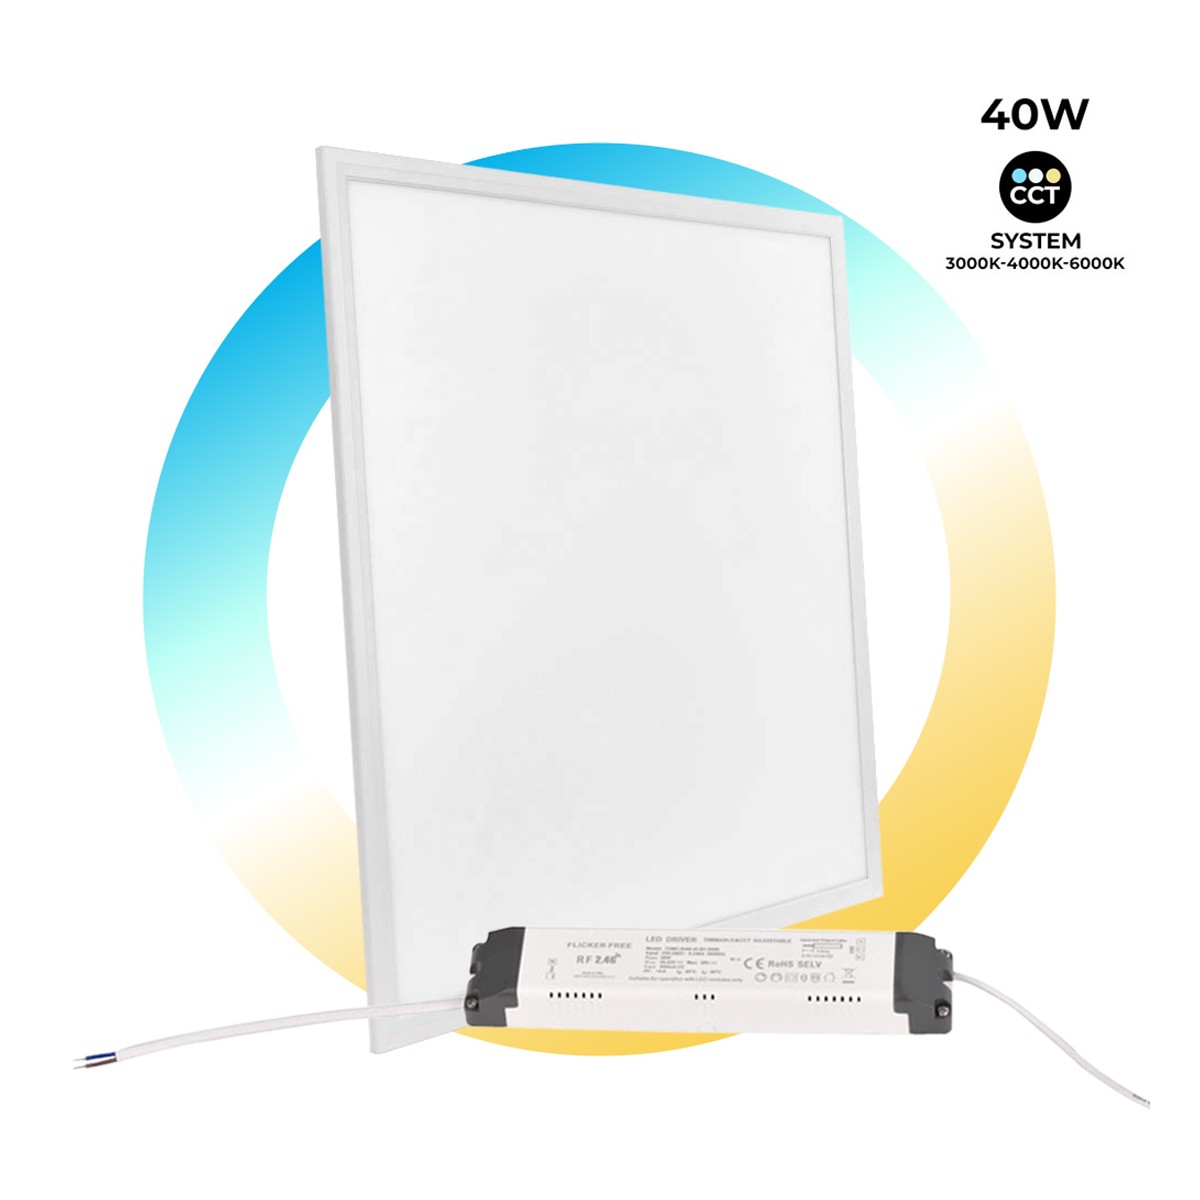 60x60 - slim CCT cm LED - 40W Dimmable panel